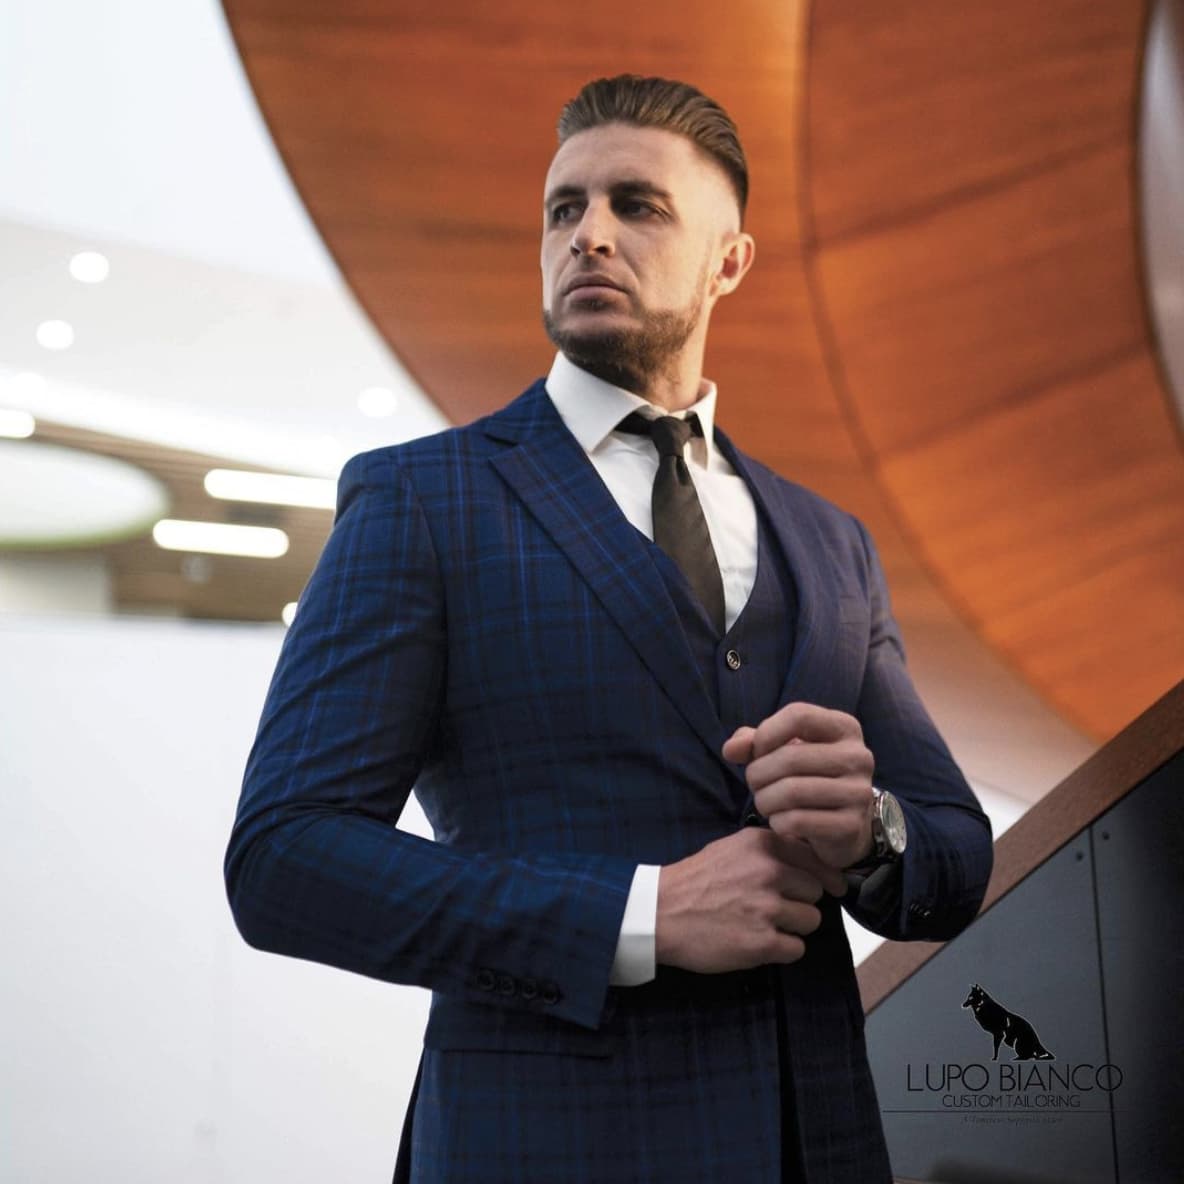 Shop Smart Tailor-made Suits to Flatter your Style – hariomstailor